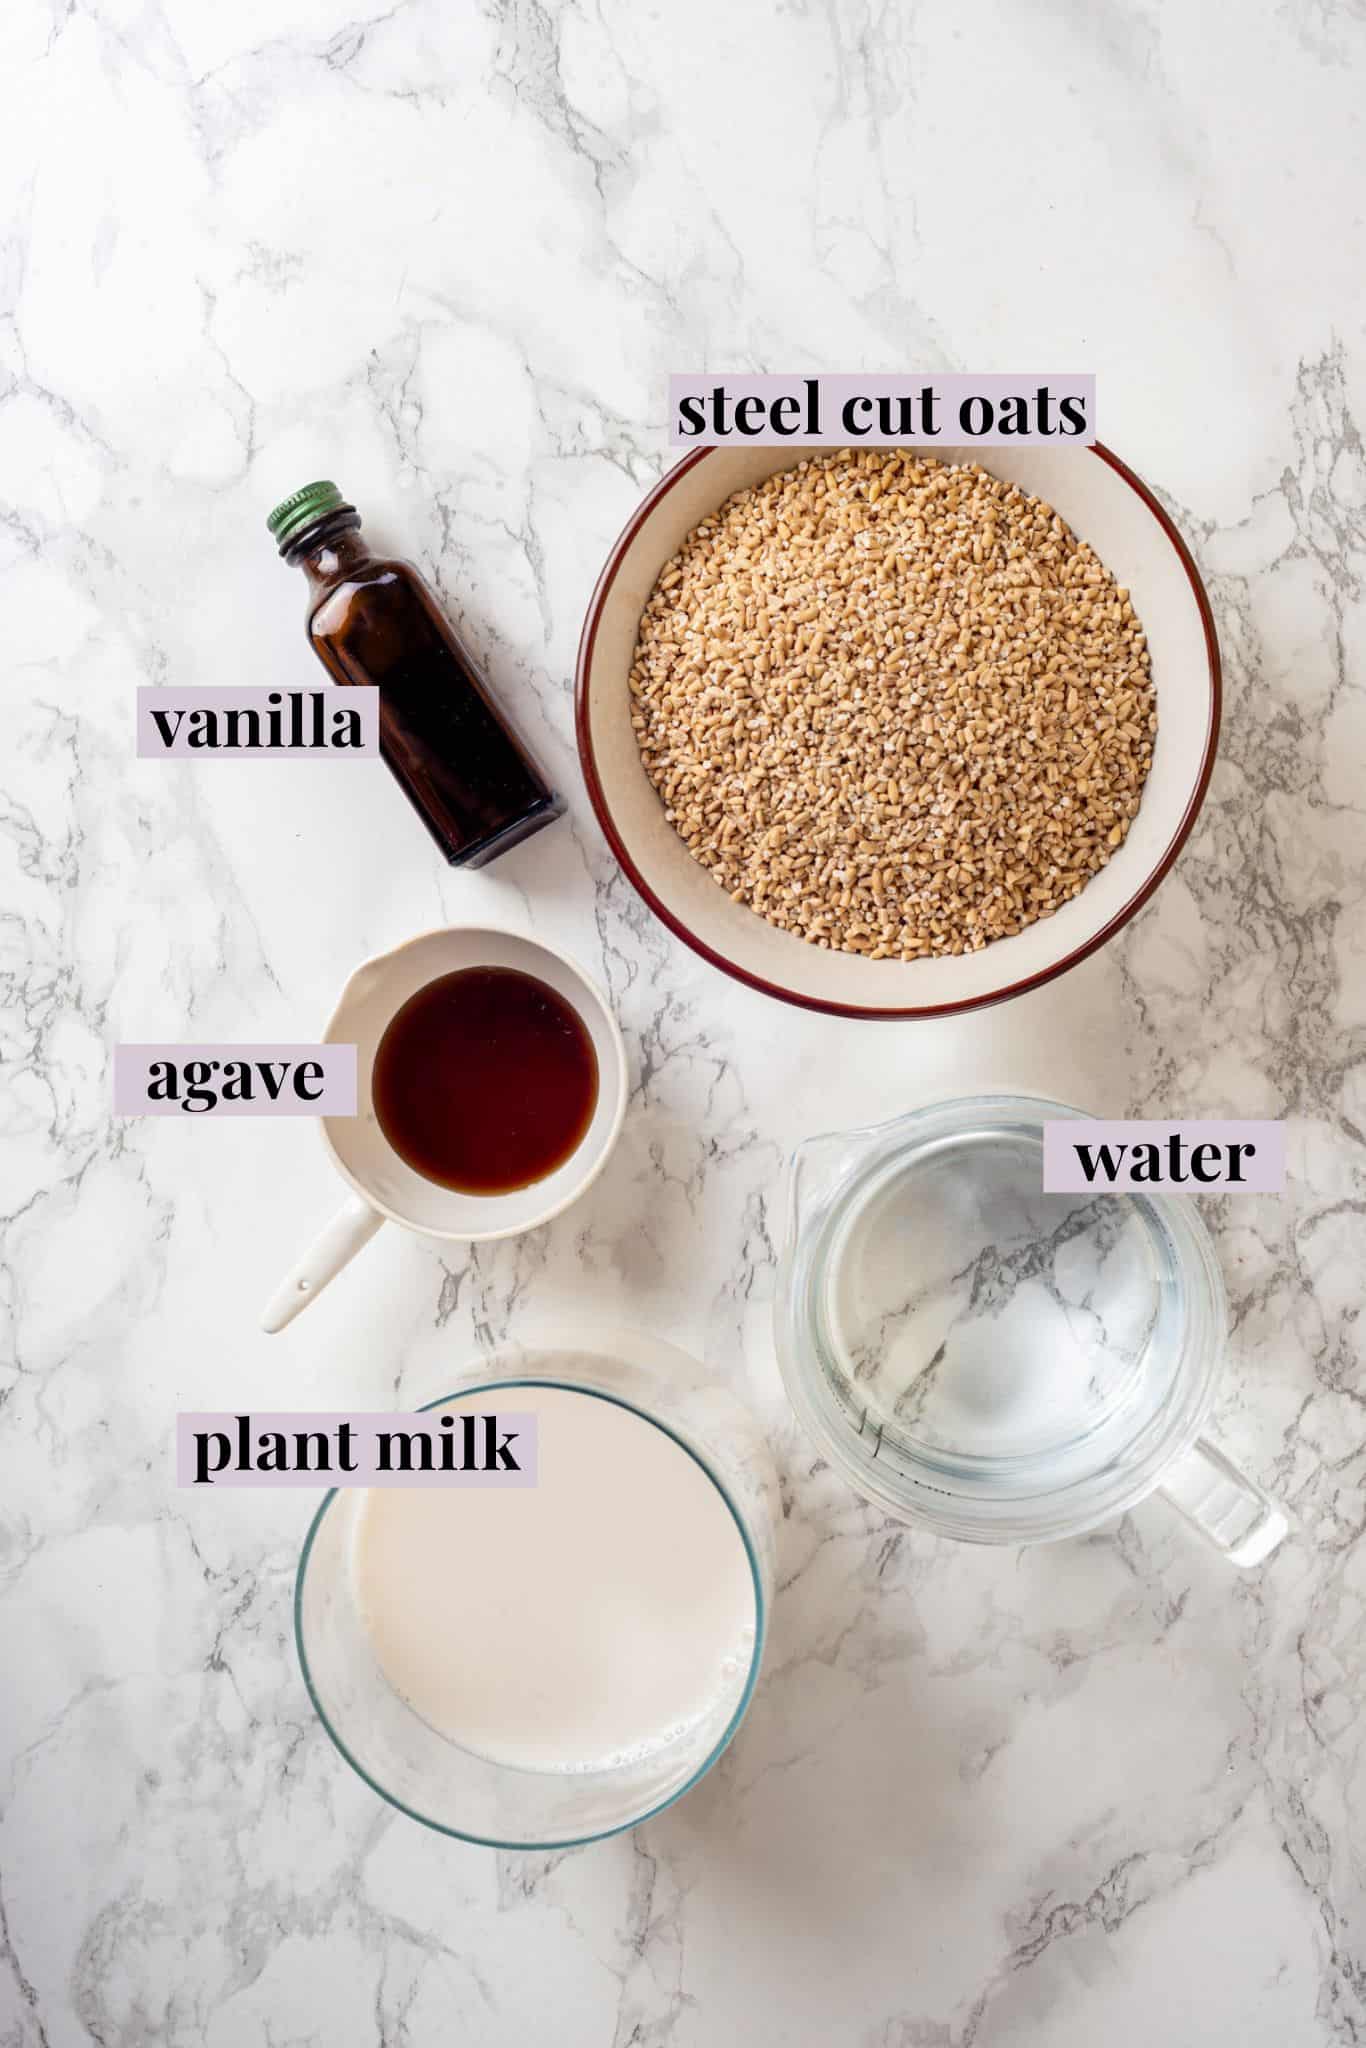 Overhead view of ingredients for Instant Pot steel-cut oats